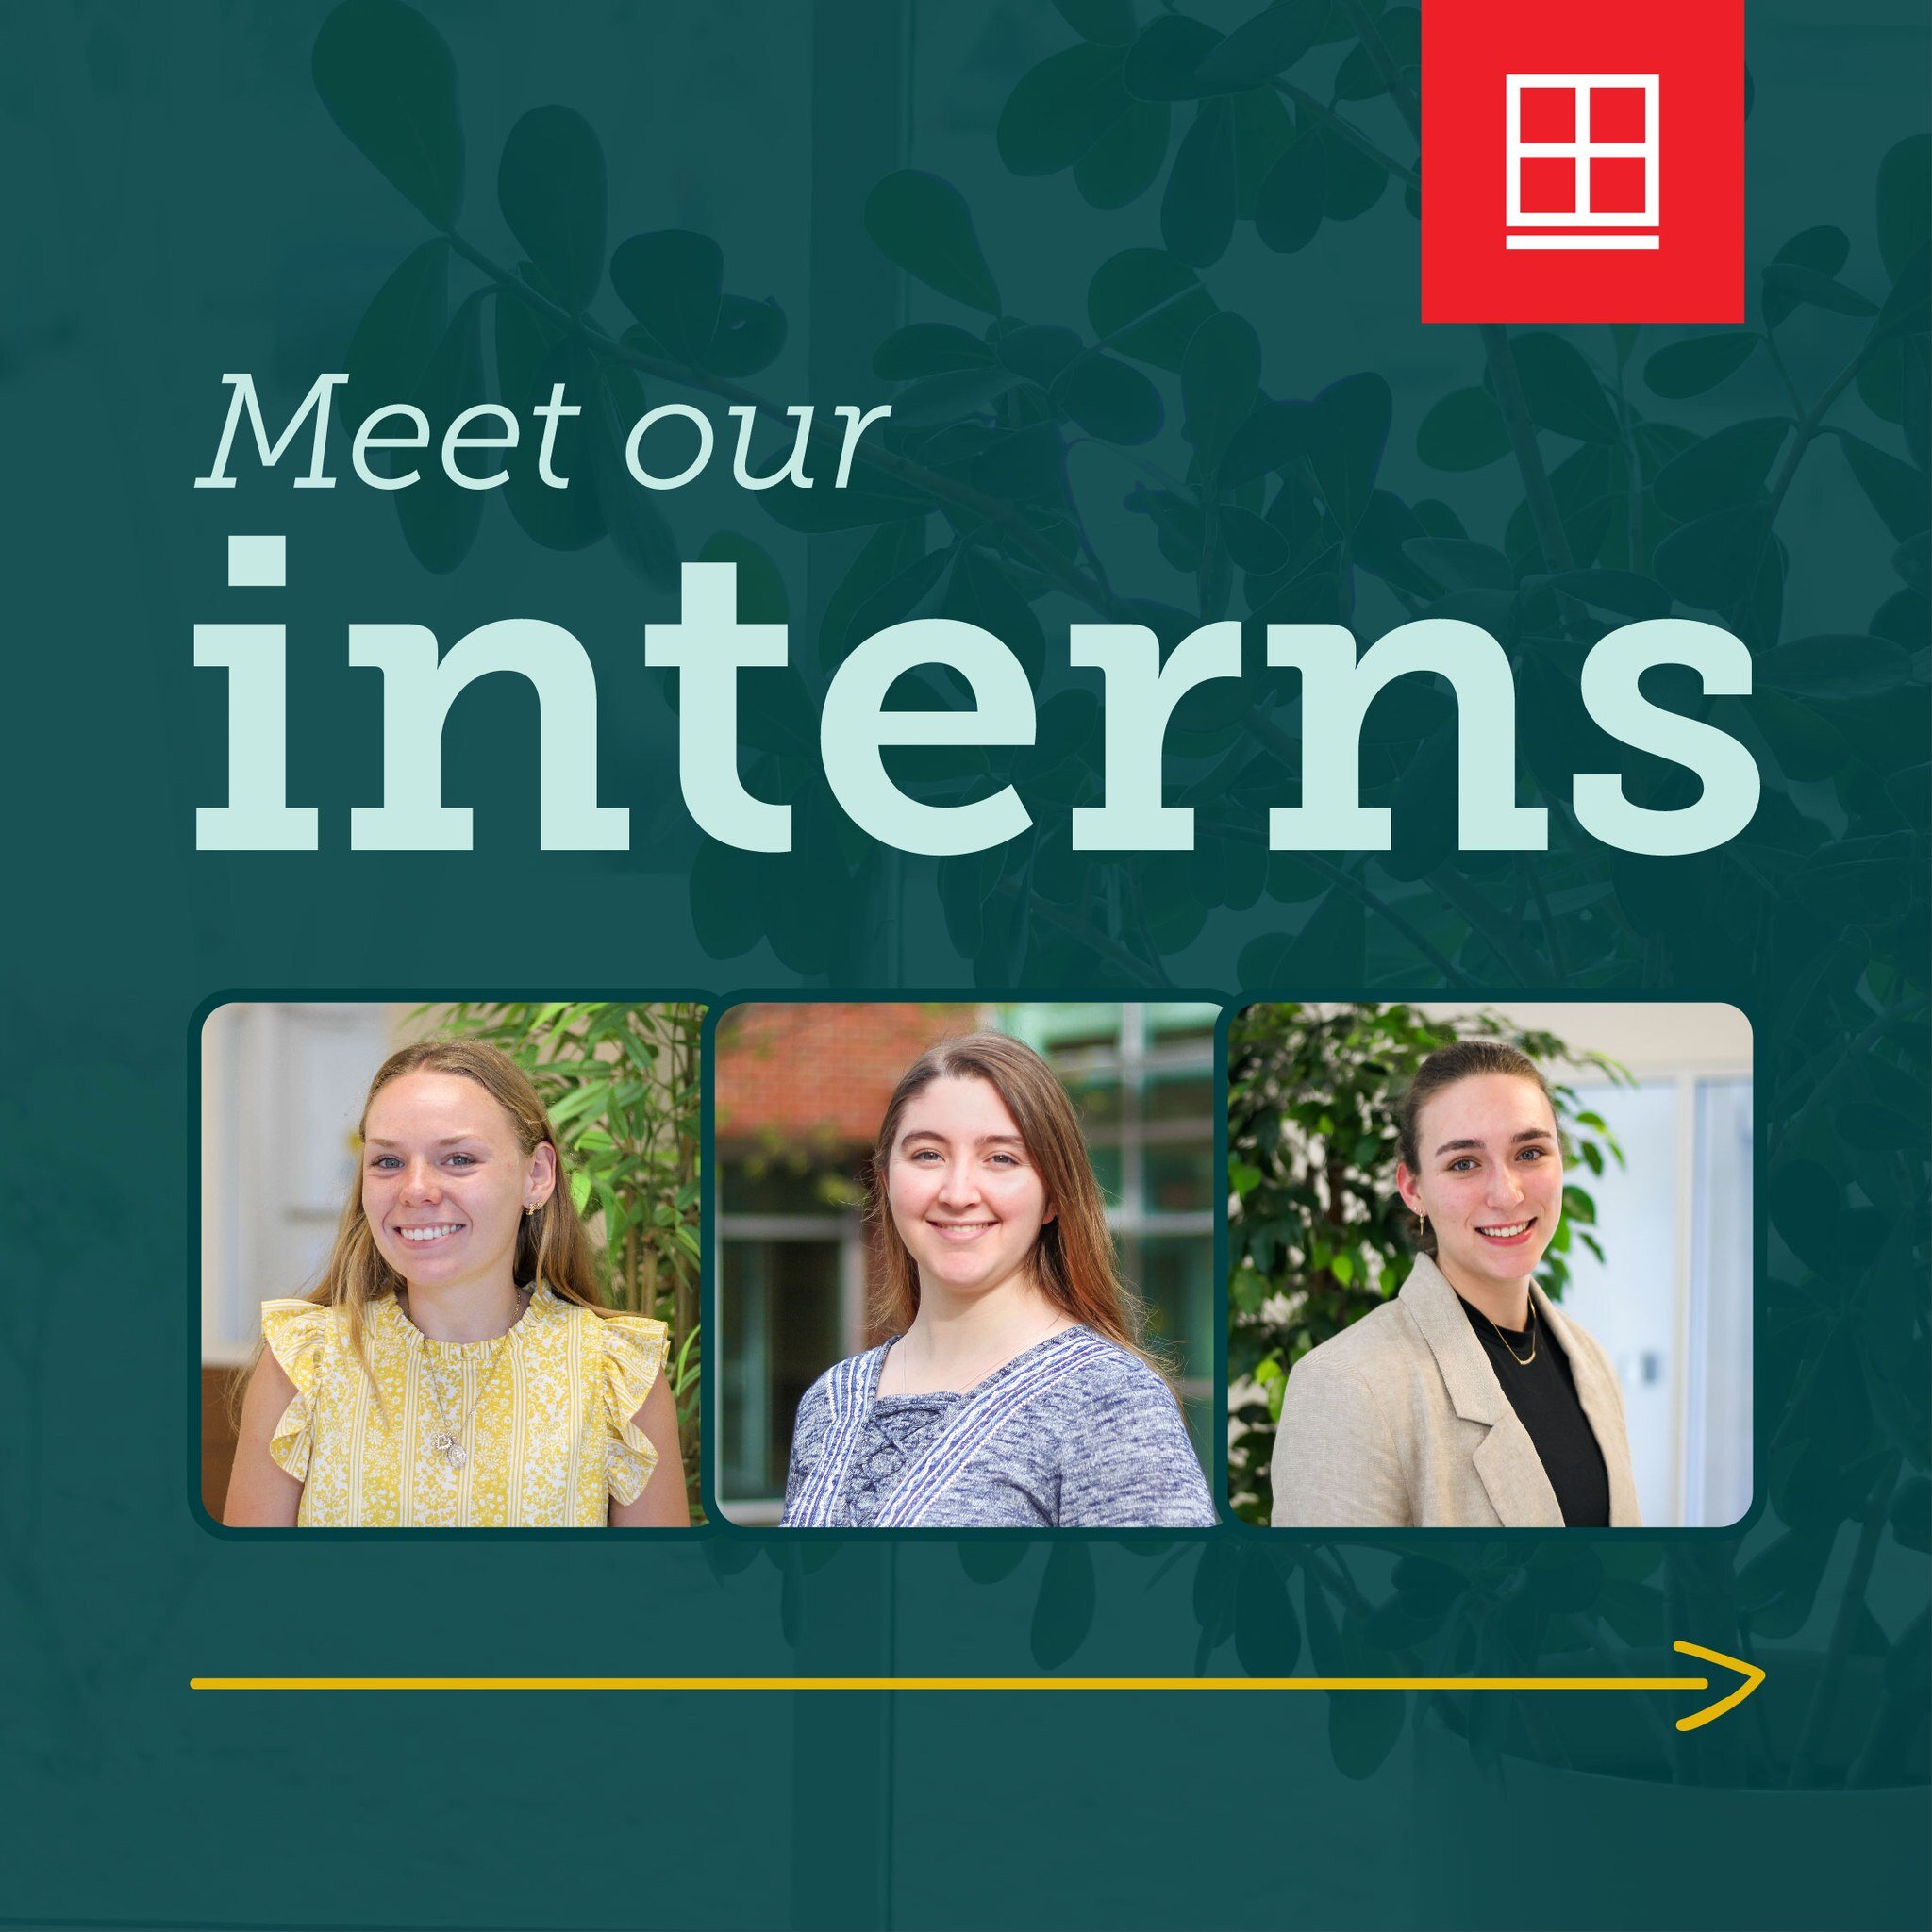 Meet our spring interns: Brittany Kohne, Yazie Goulet and Ella Ward.

Brittany is a junior majoring in Journalism. As the multi-media coordinator for @thedailymississippian, she tells stories about student life by hosting and producing the Weekly Sco